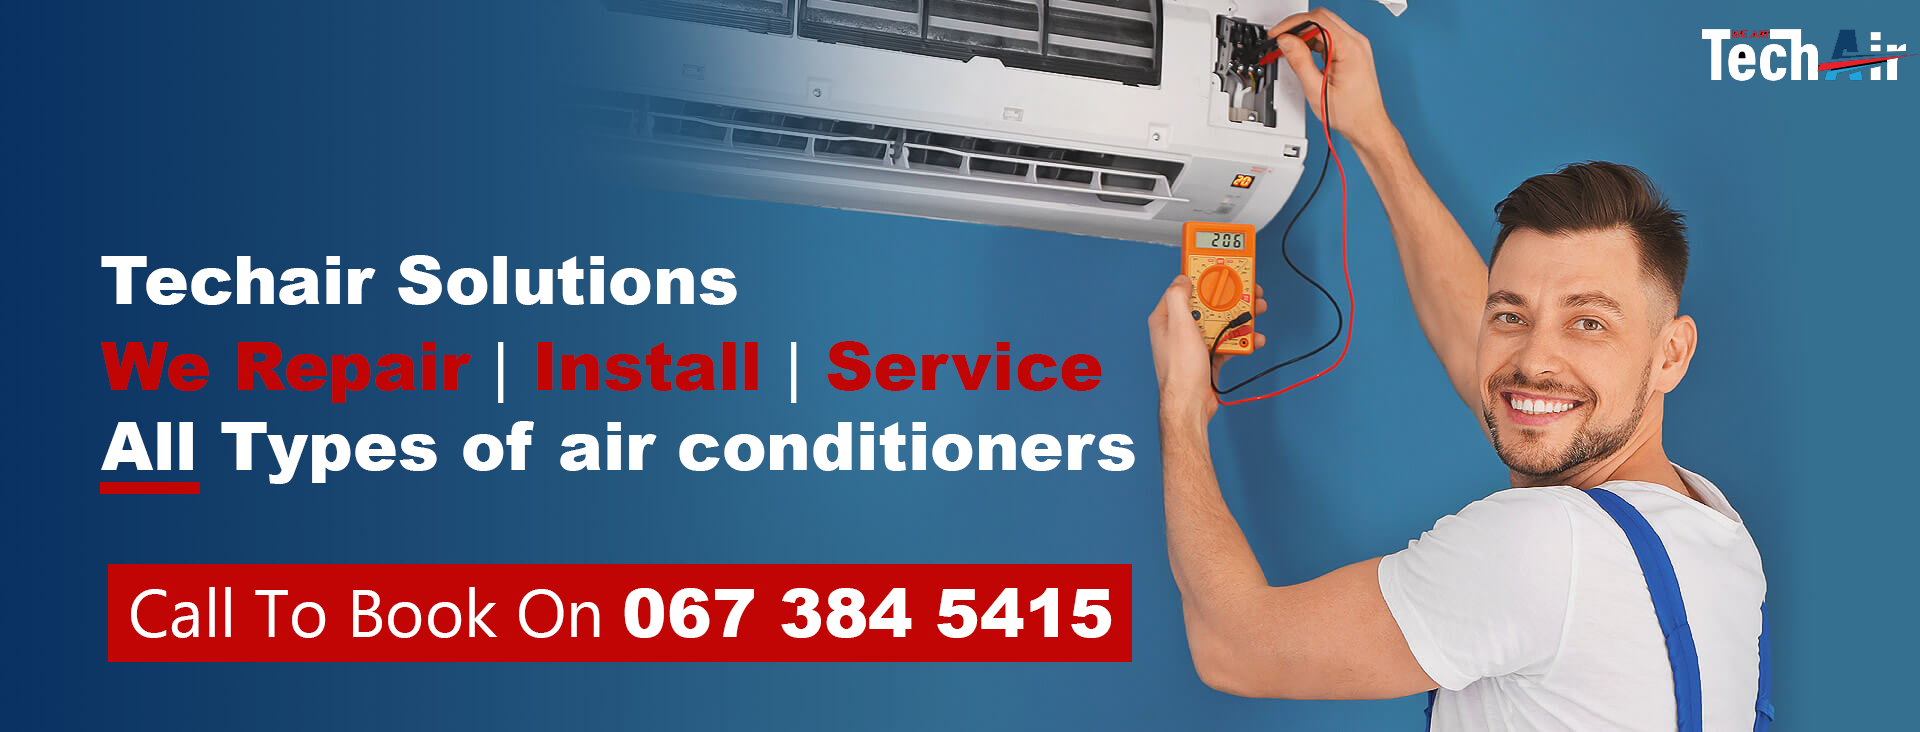 Waterfall City Air Conditioning Repairs and Installations